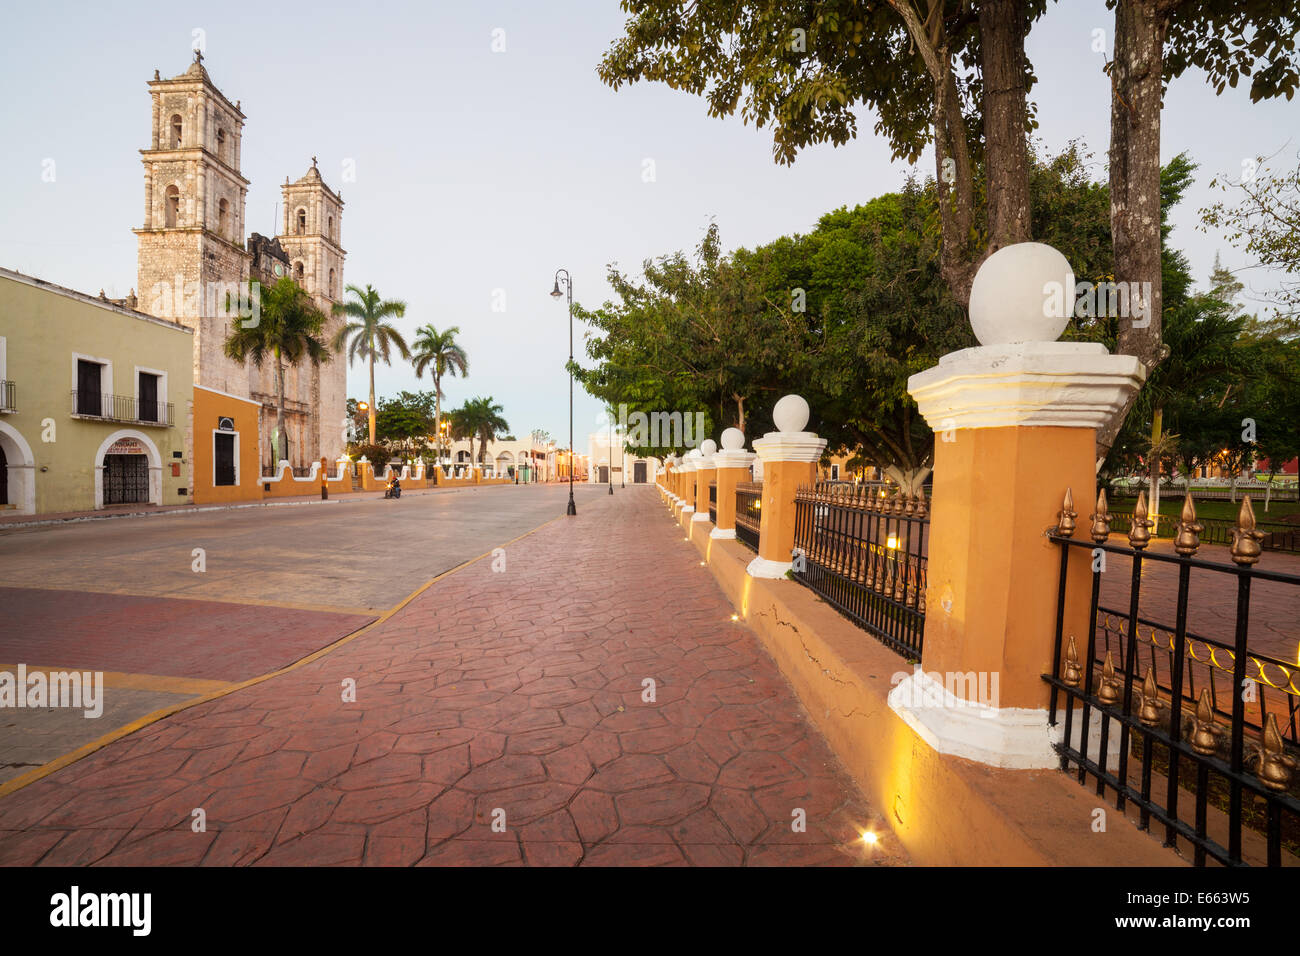 Cathedral and plaza of Valladolid, Yucatan, Mexico. Stock Photo